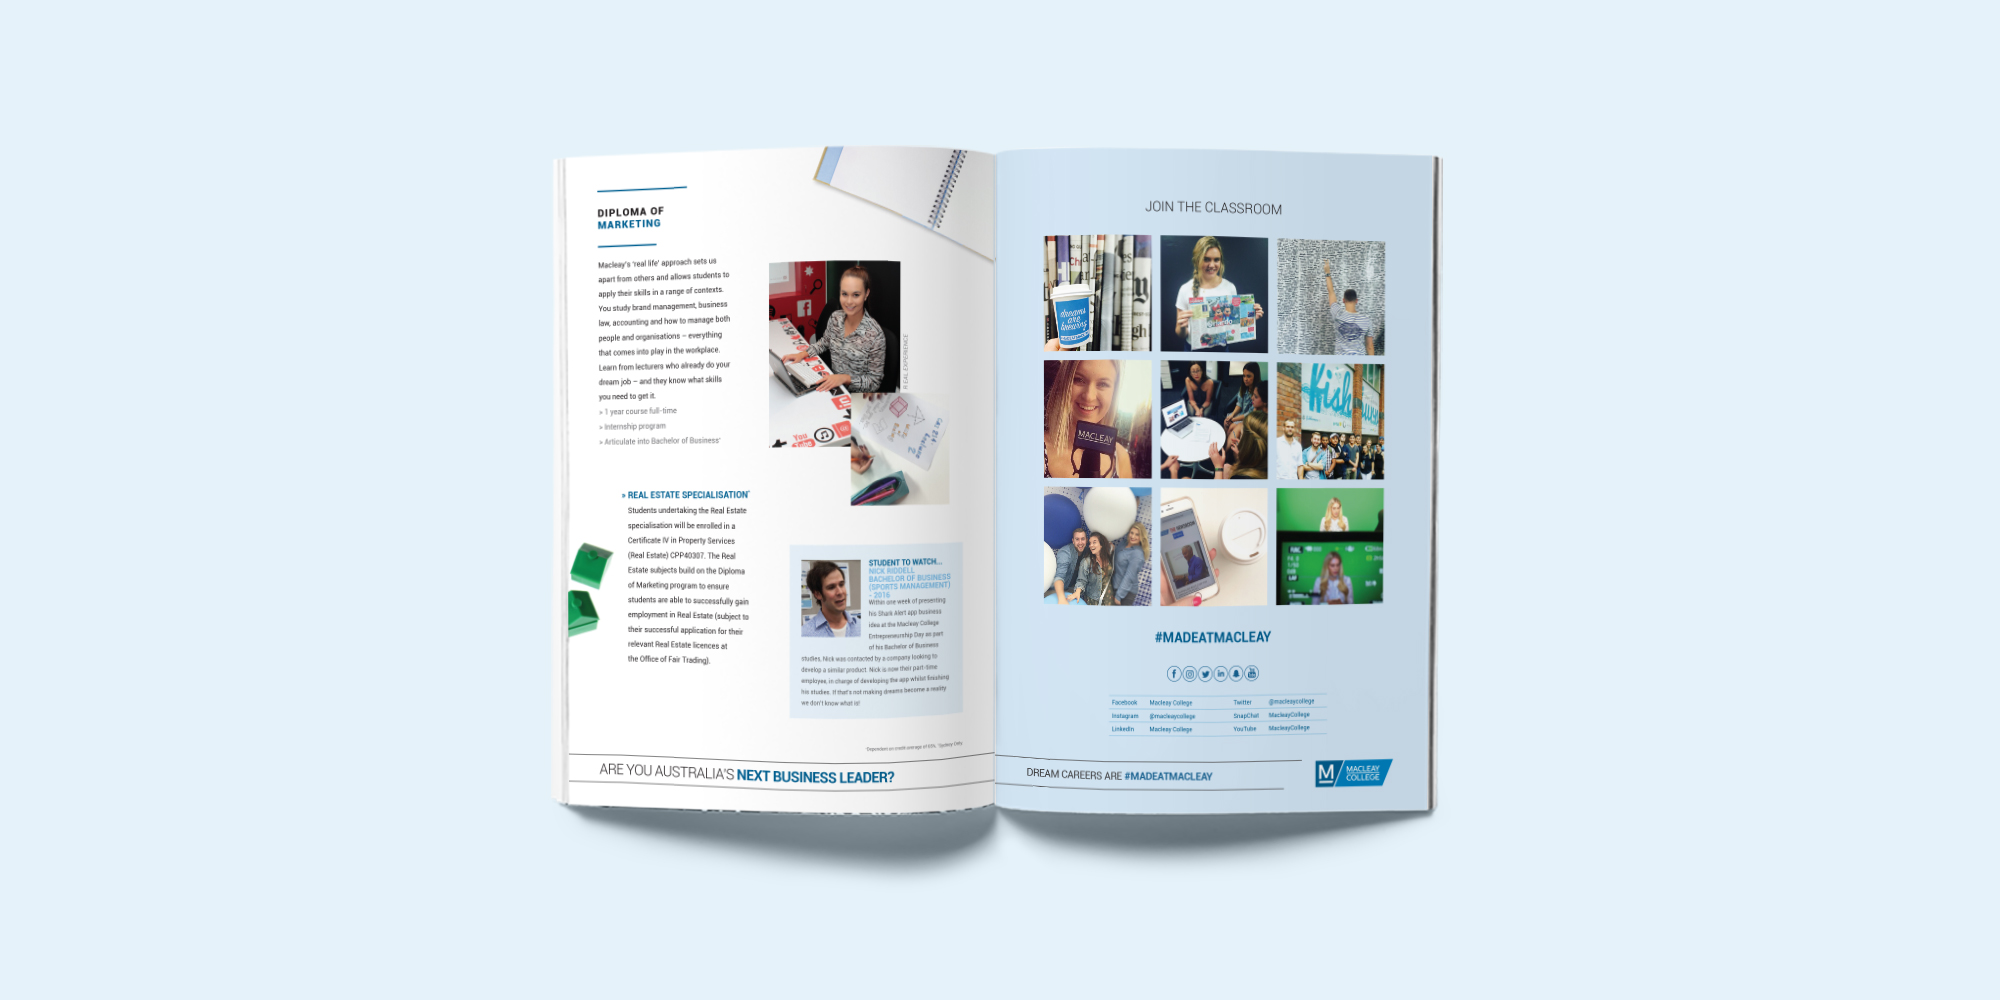 Macleay College Course Brochure